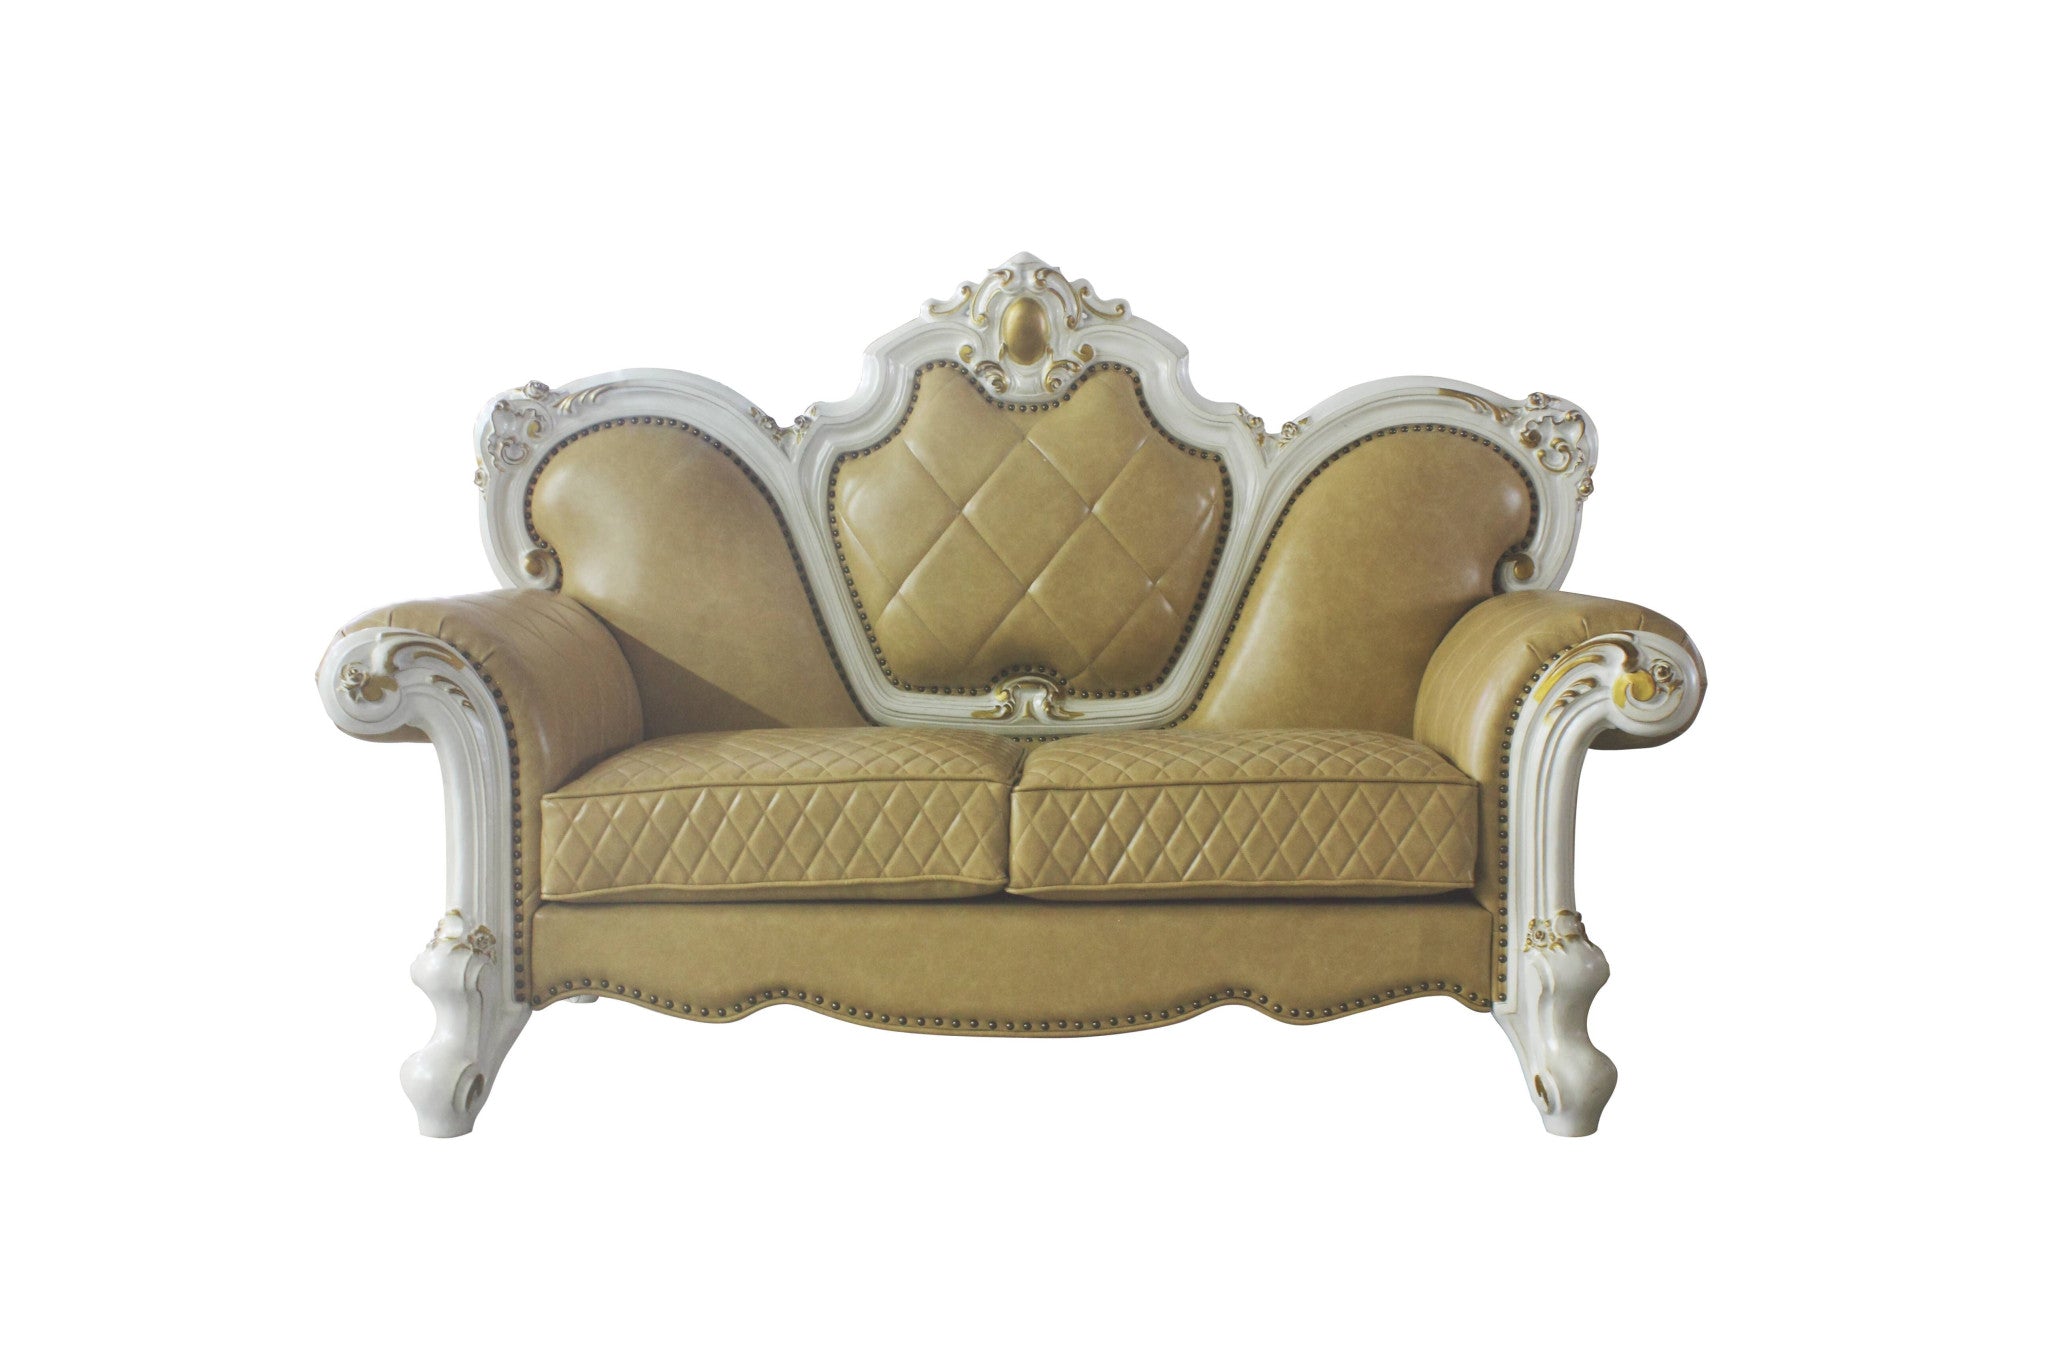 70" Butterscotch And Pearl Faux Leather Loveseat and Toss Pillows